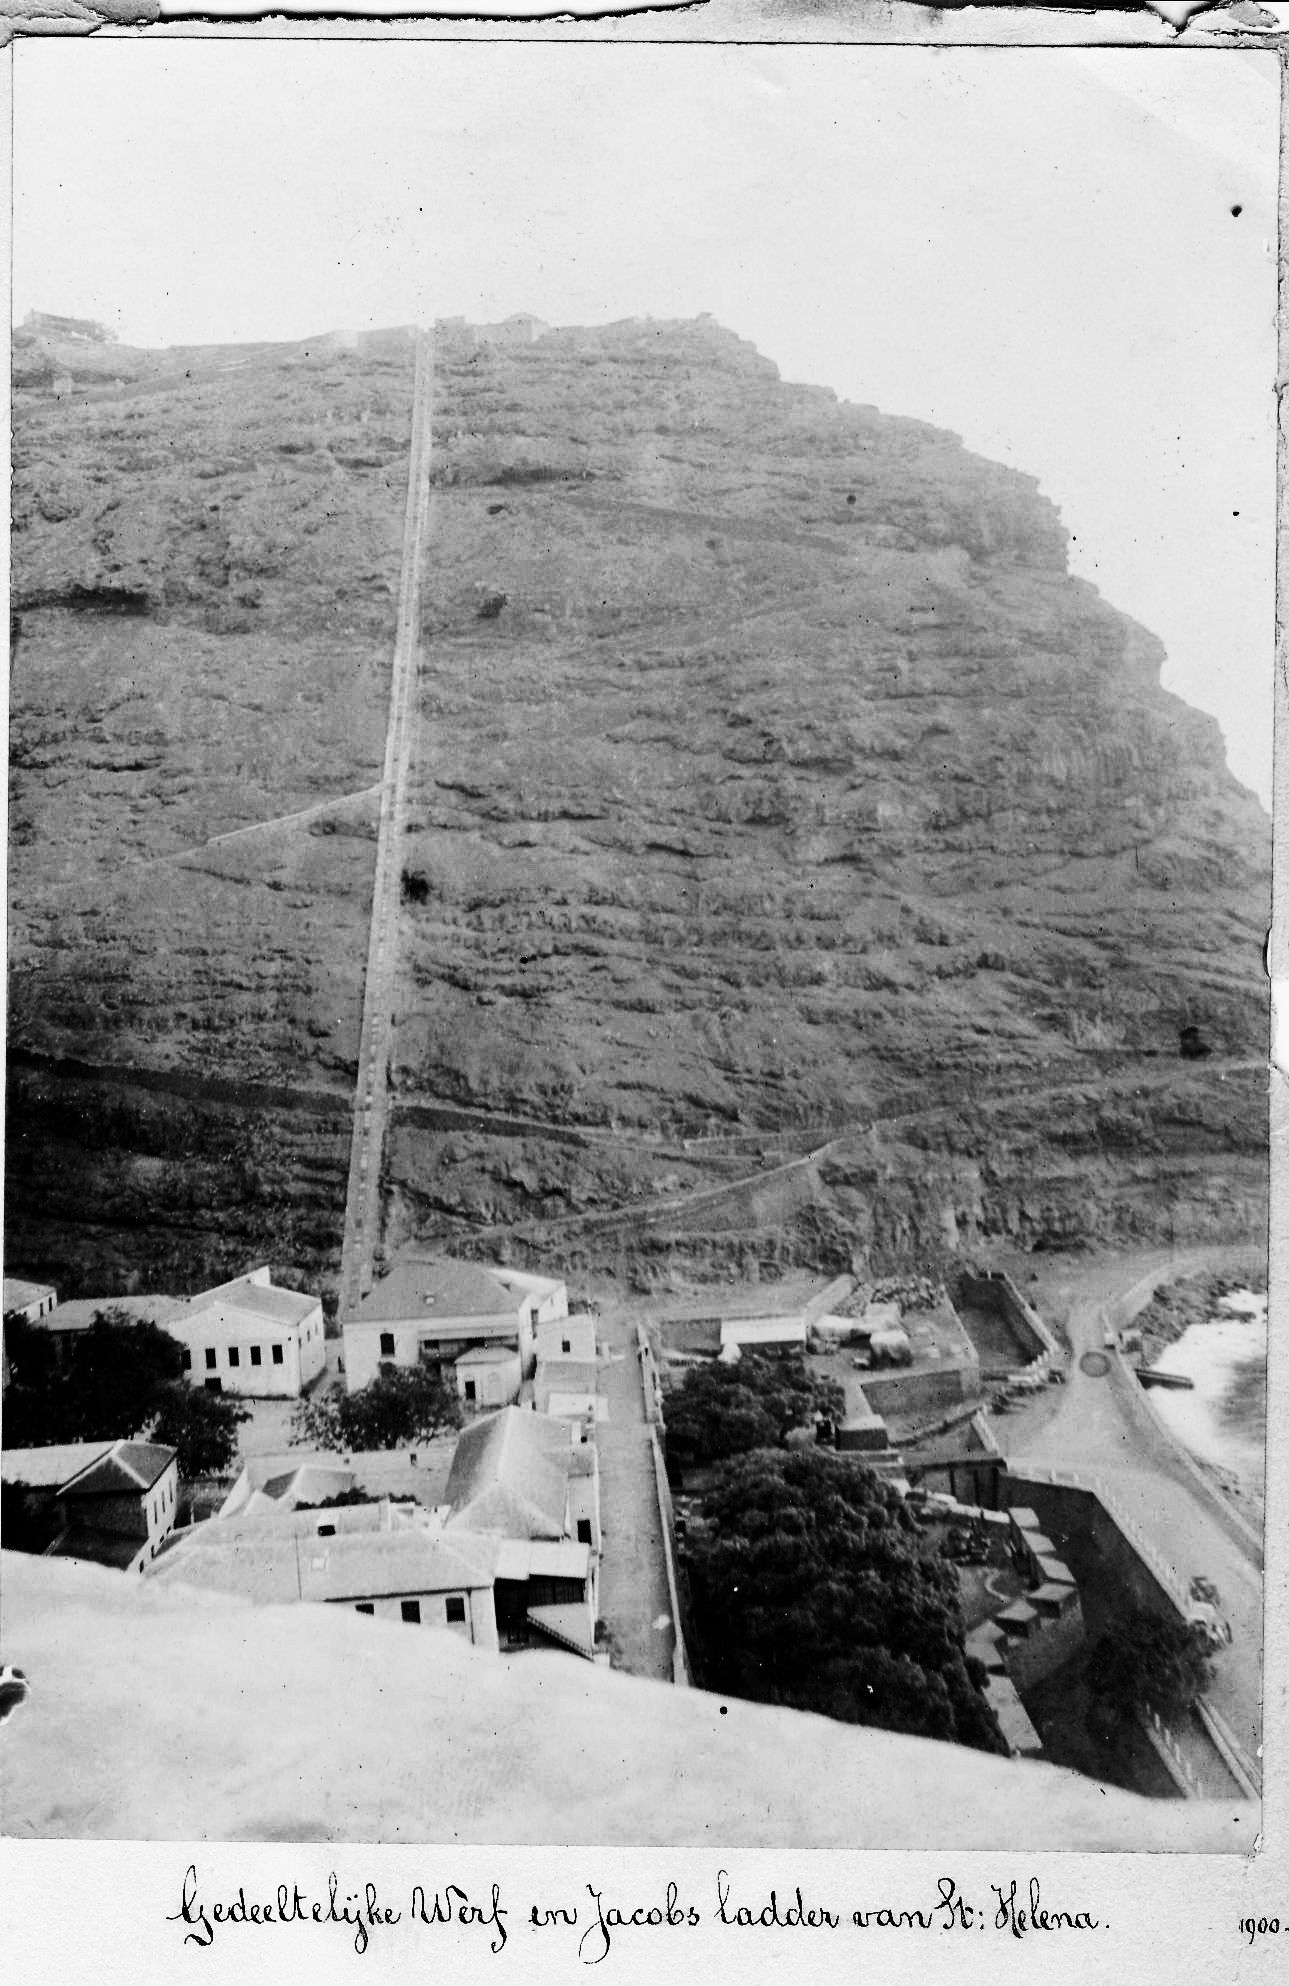 Temporary wharf and Jacobs Ladder St Helena